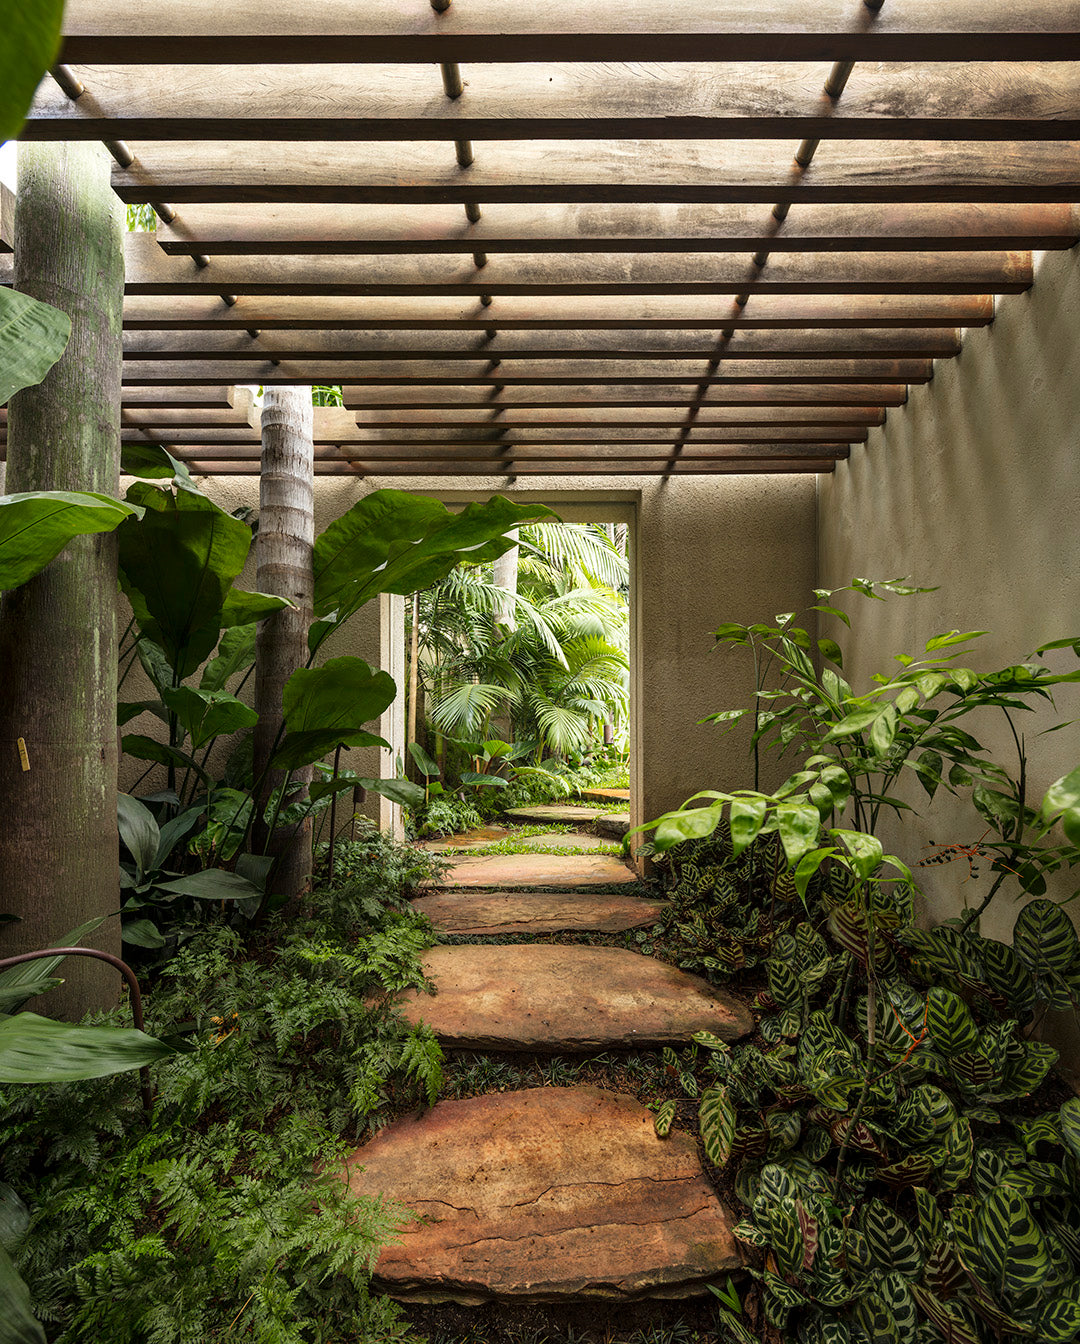 Isay Weinfeld - An Architect from Brazil 